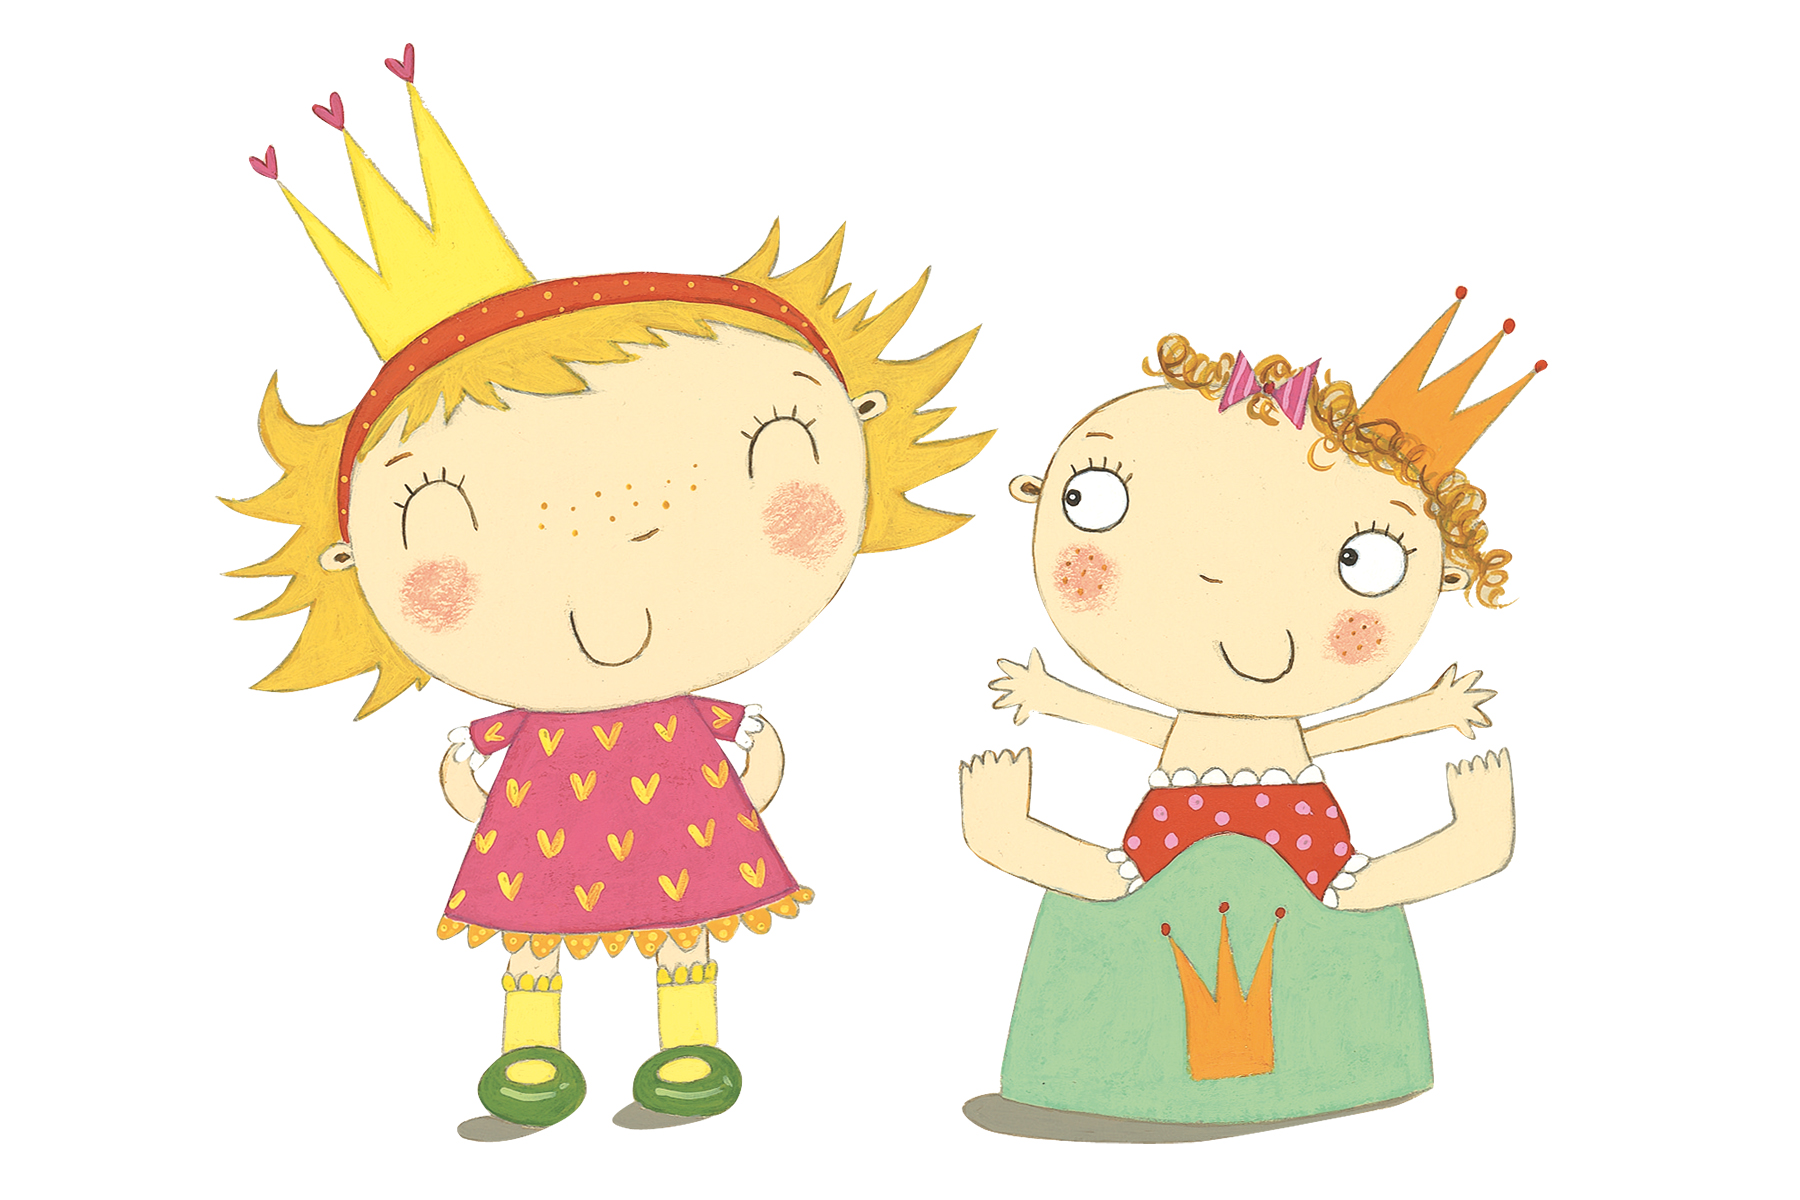 An illustration of Princess Polly wearing her crown and a dress as she's smiling at her younger sister who is sitting on a potty